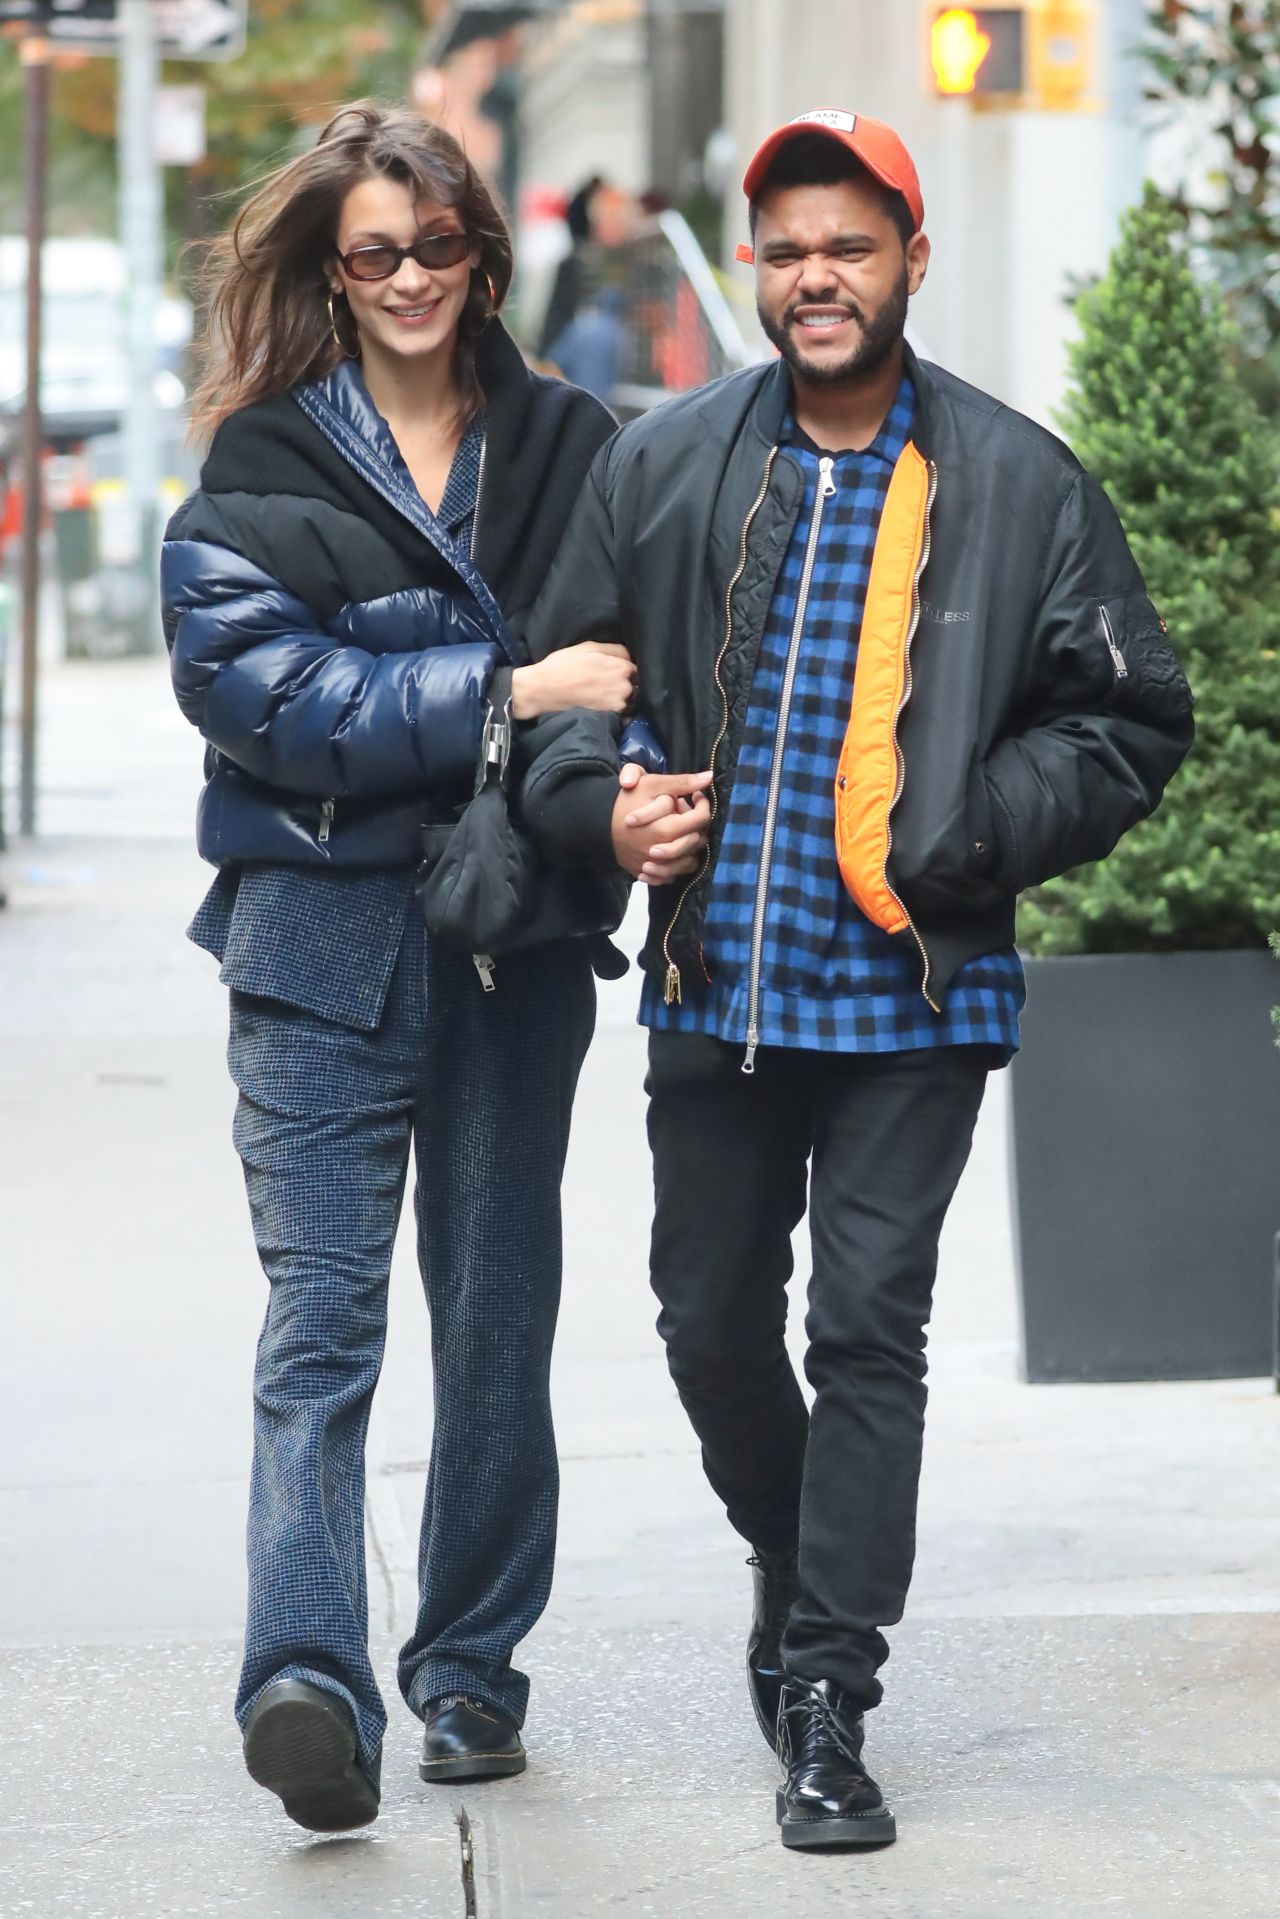 bella-hadid-and-the-weeknd-out-in-new-york-city-10-29-2018-6.jpg